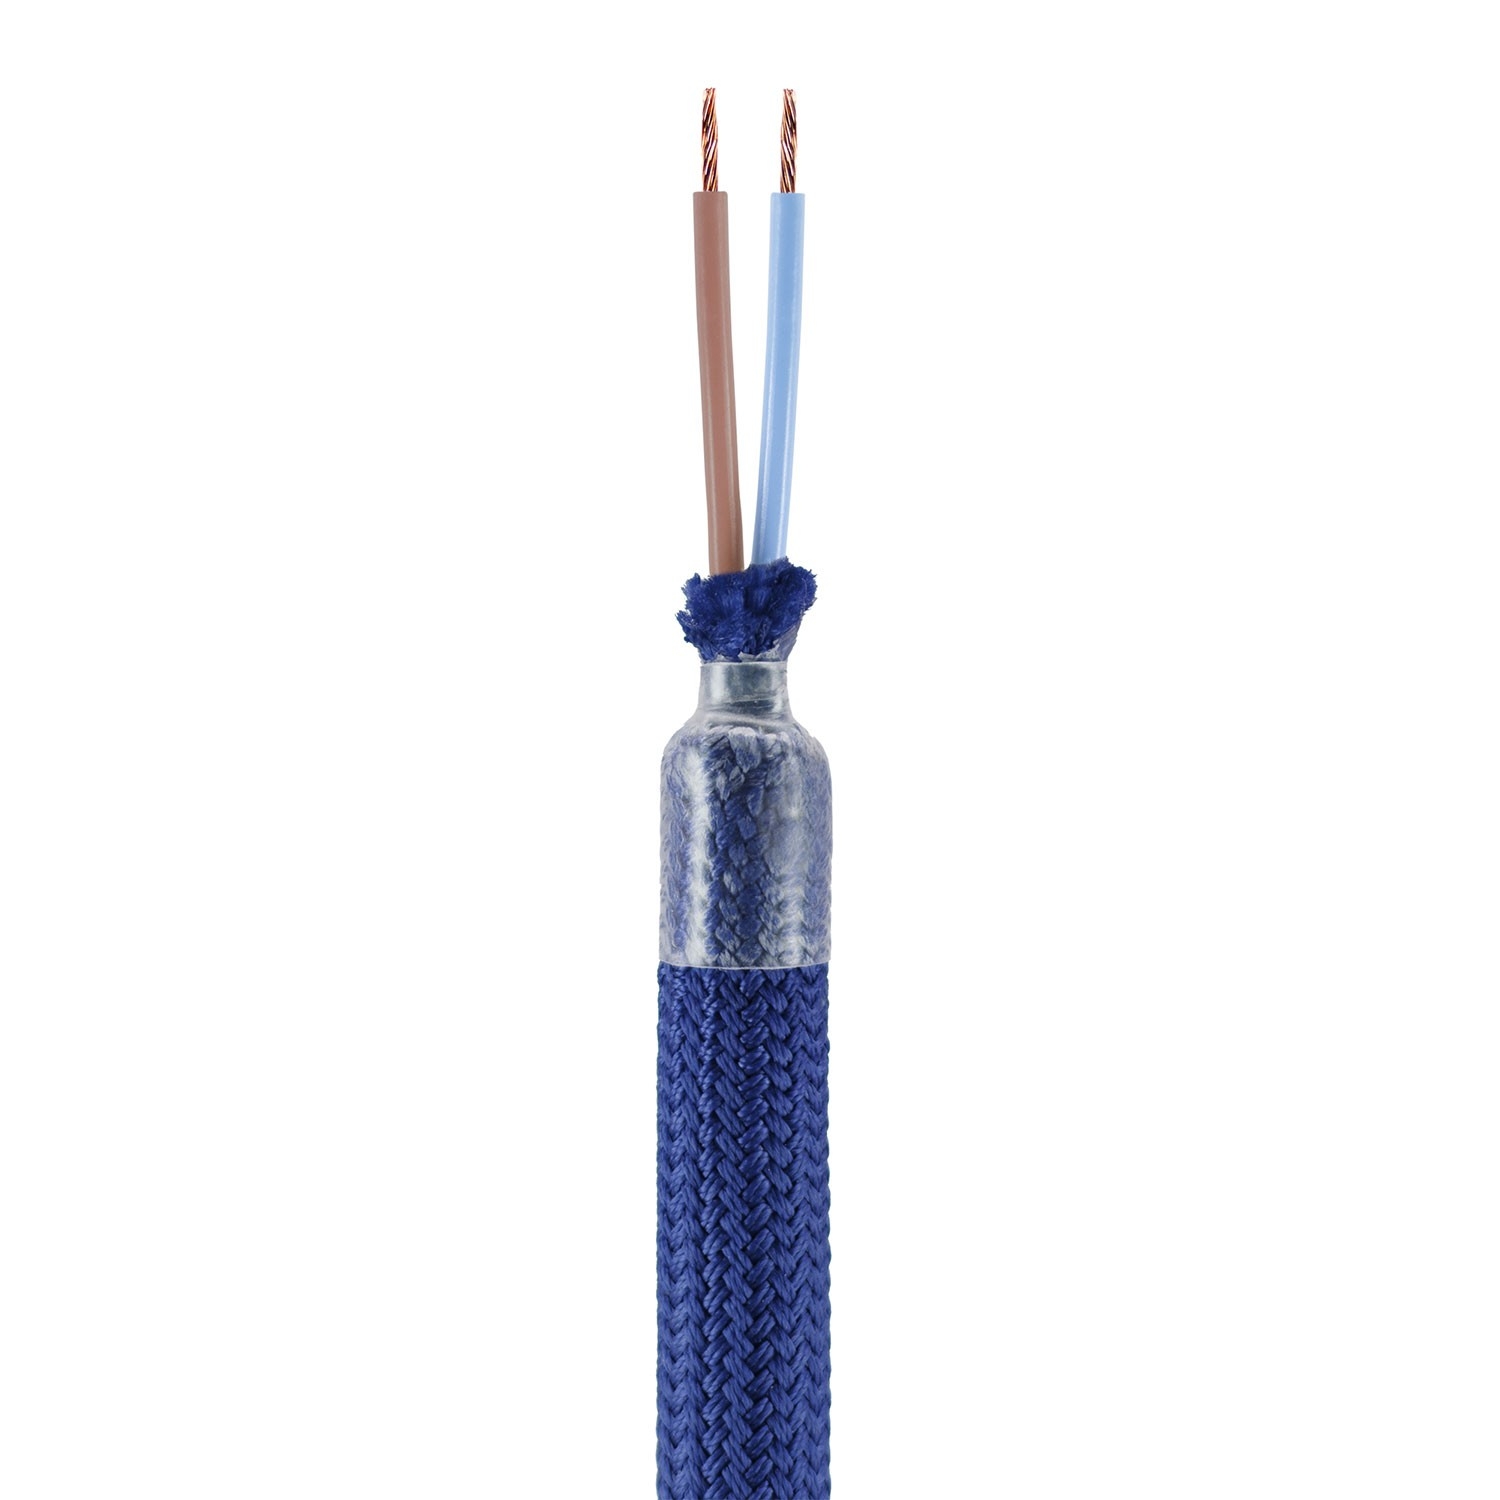 Kit Creative Flex flexible tube covered in Navy Blue RM20 fabric with metal terminals